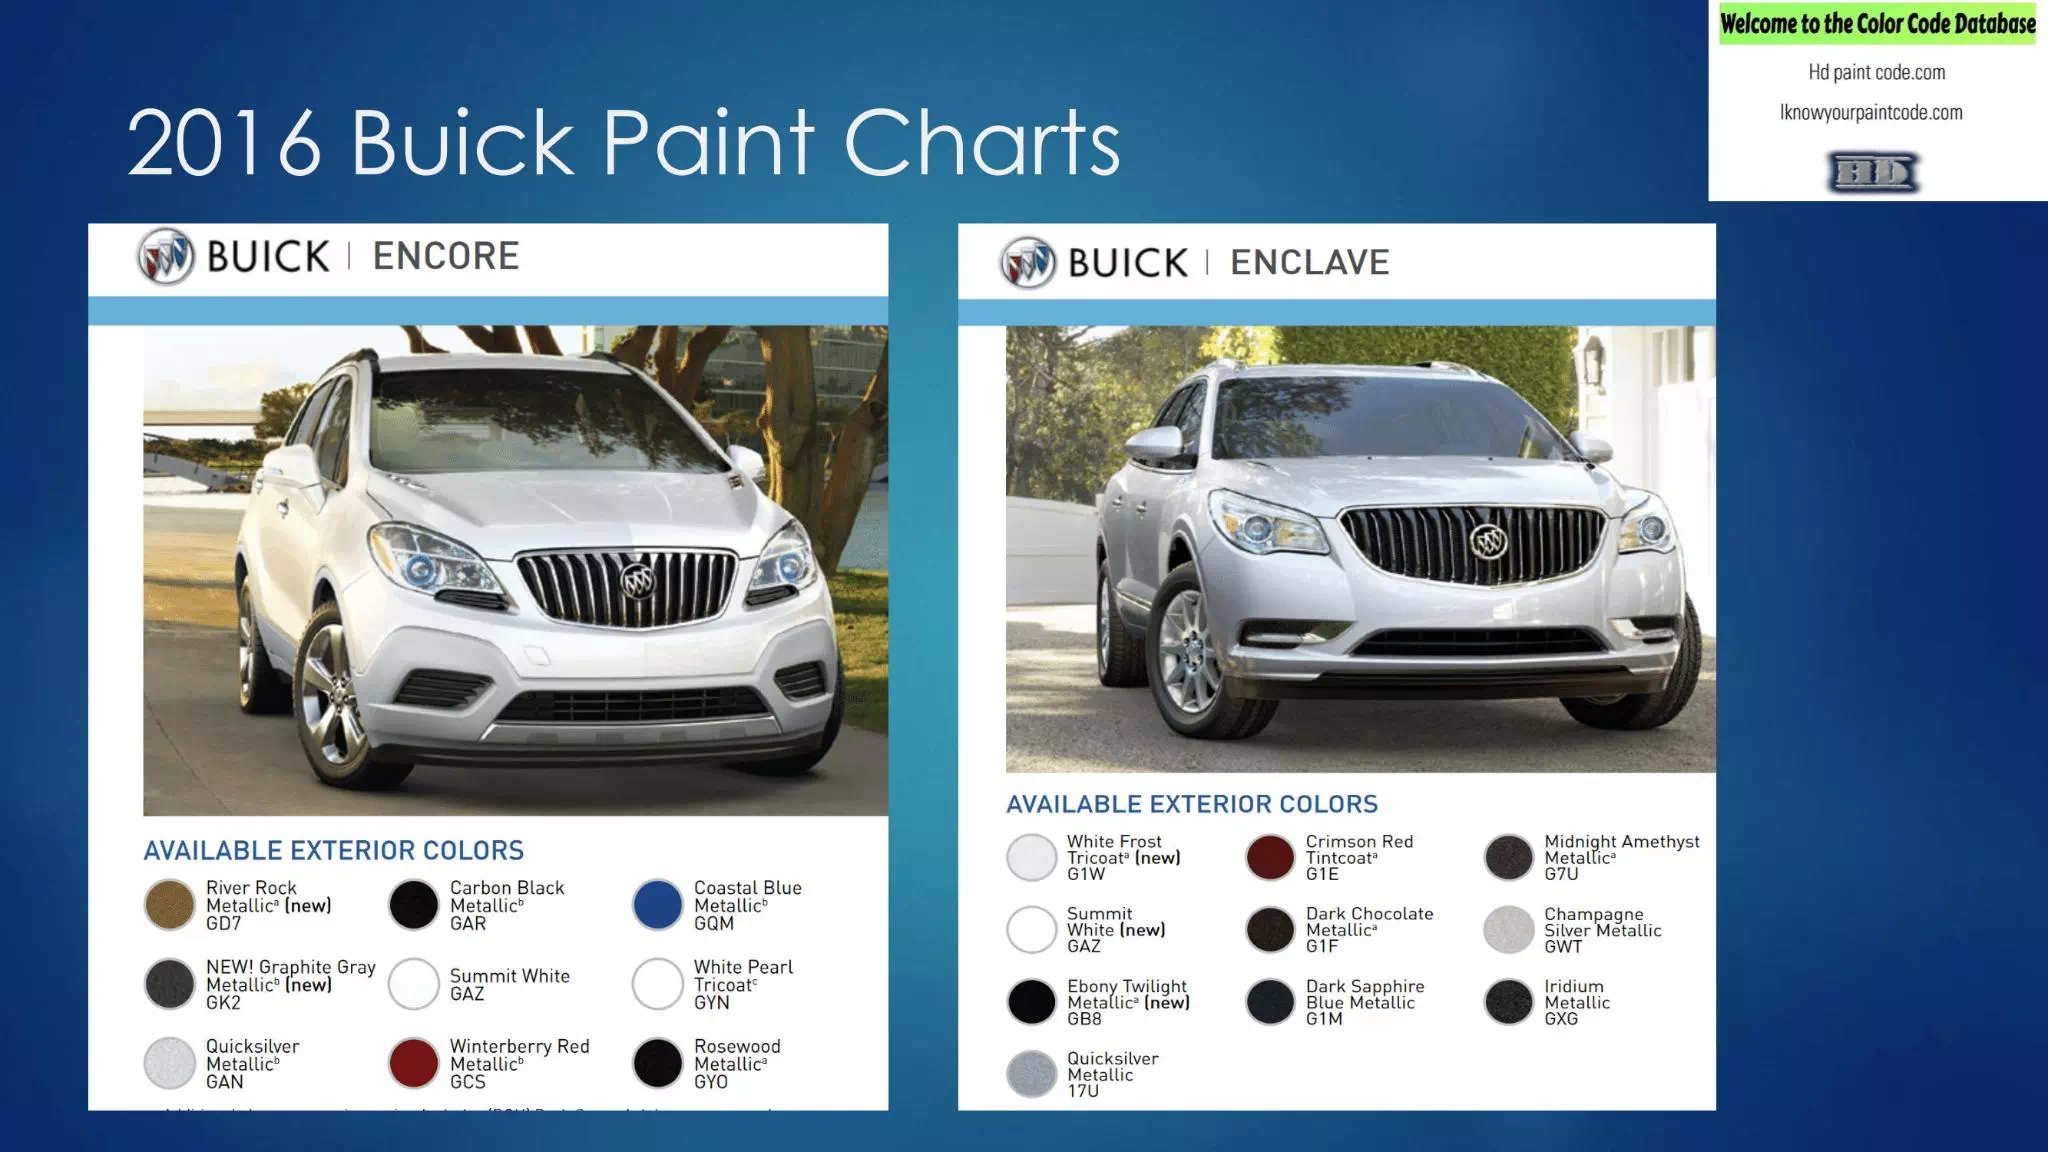 Color example and color codes used on Buick vehicles in 2016